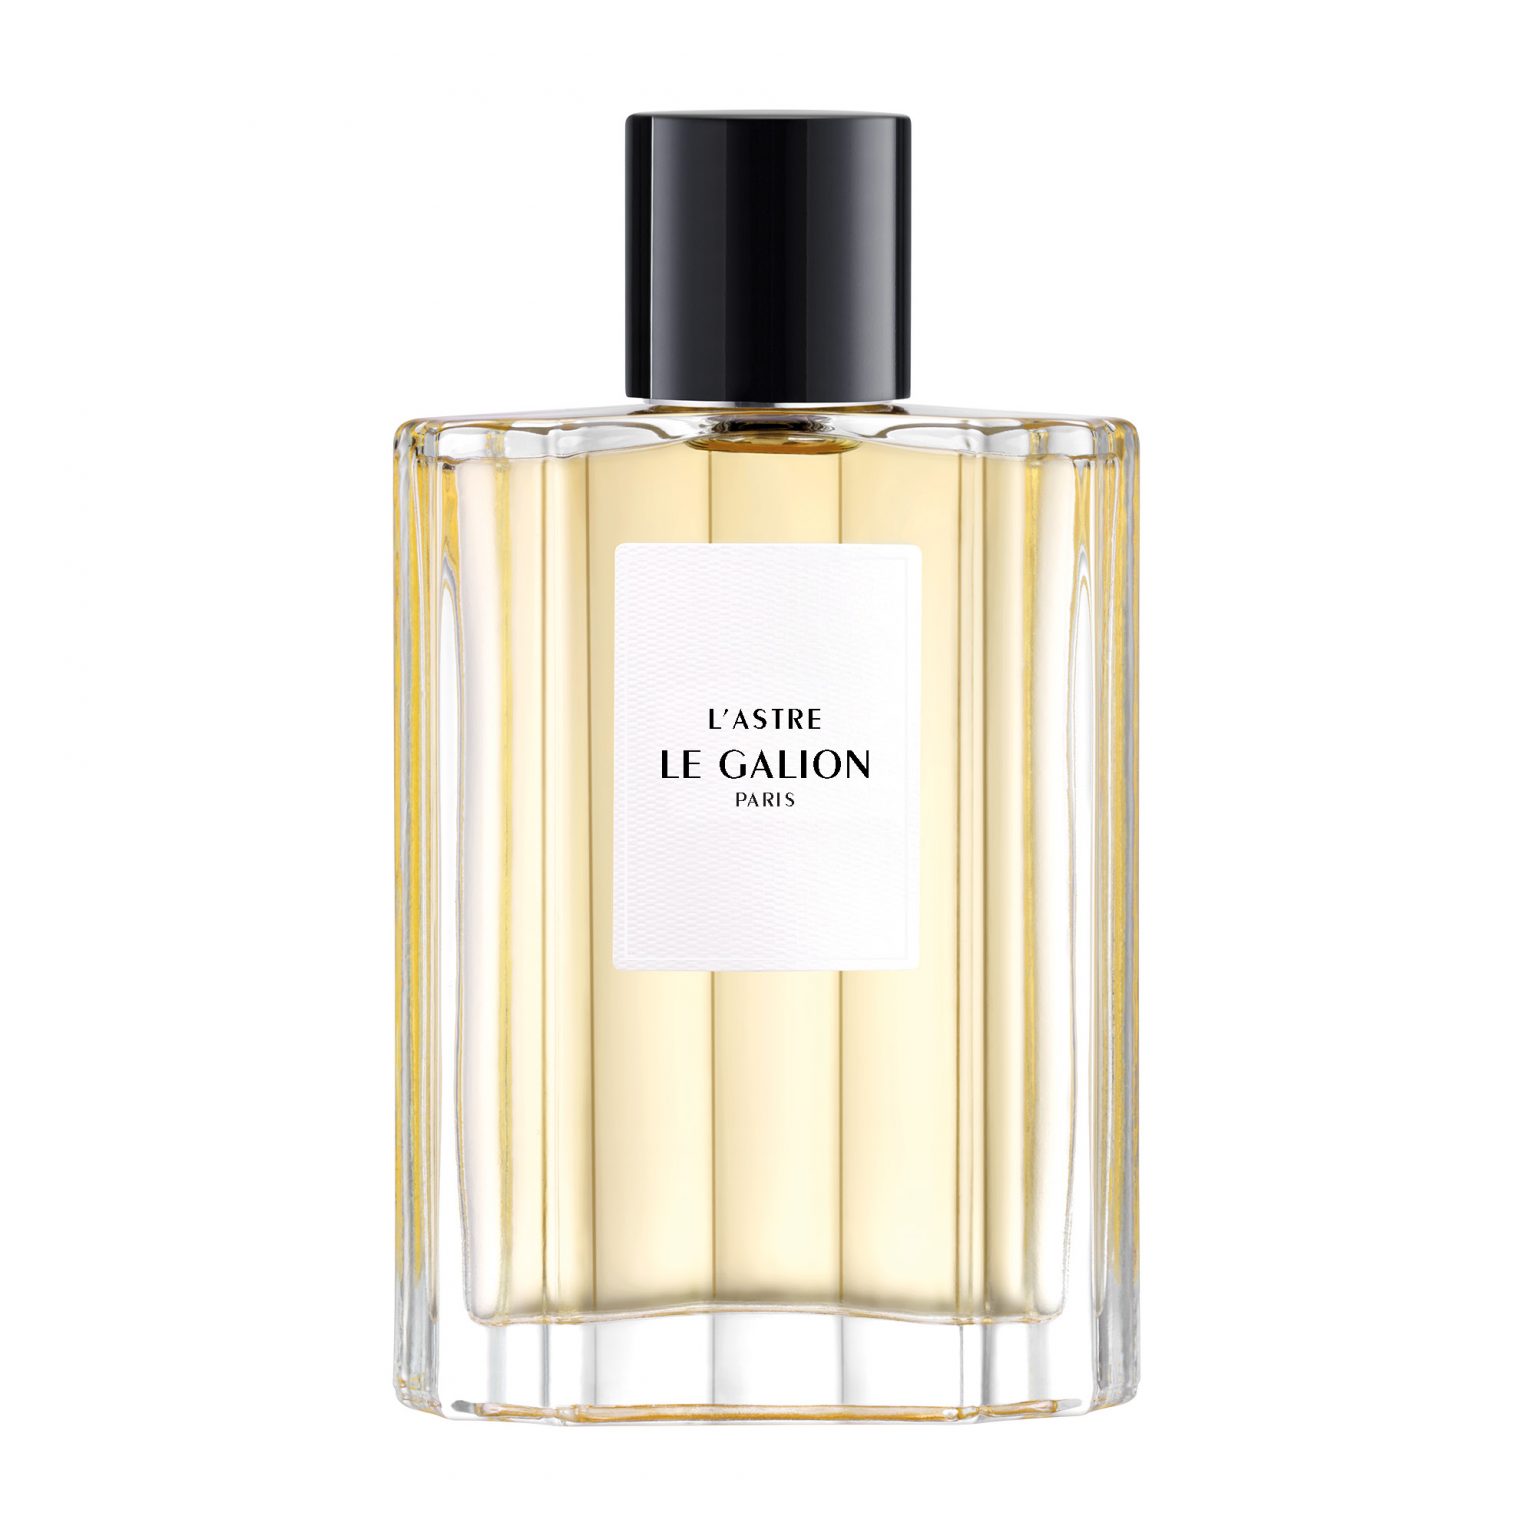 L'Astre Le Galion: The Star Shines Again! ~ Fragrance Reviews